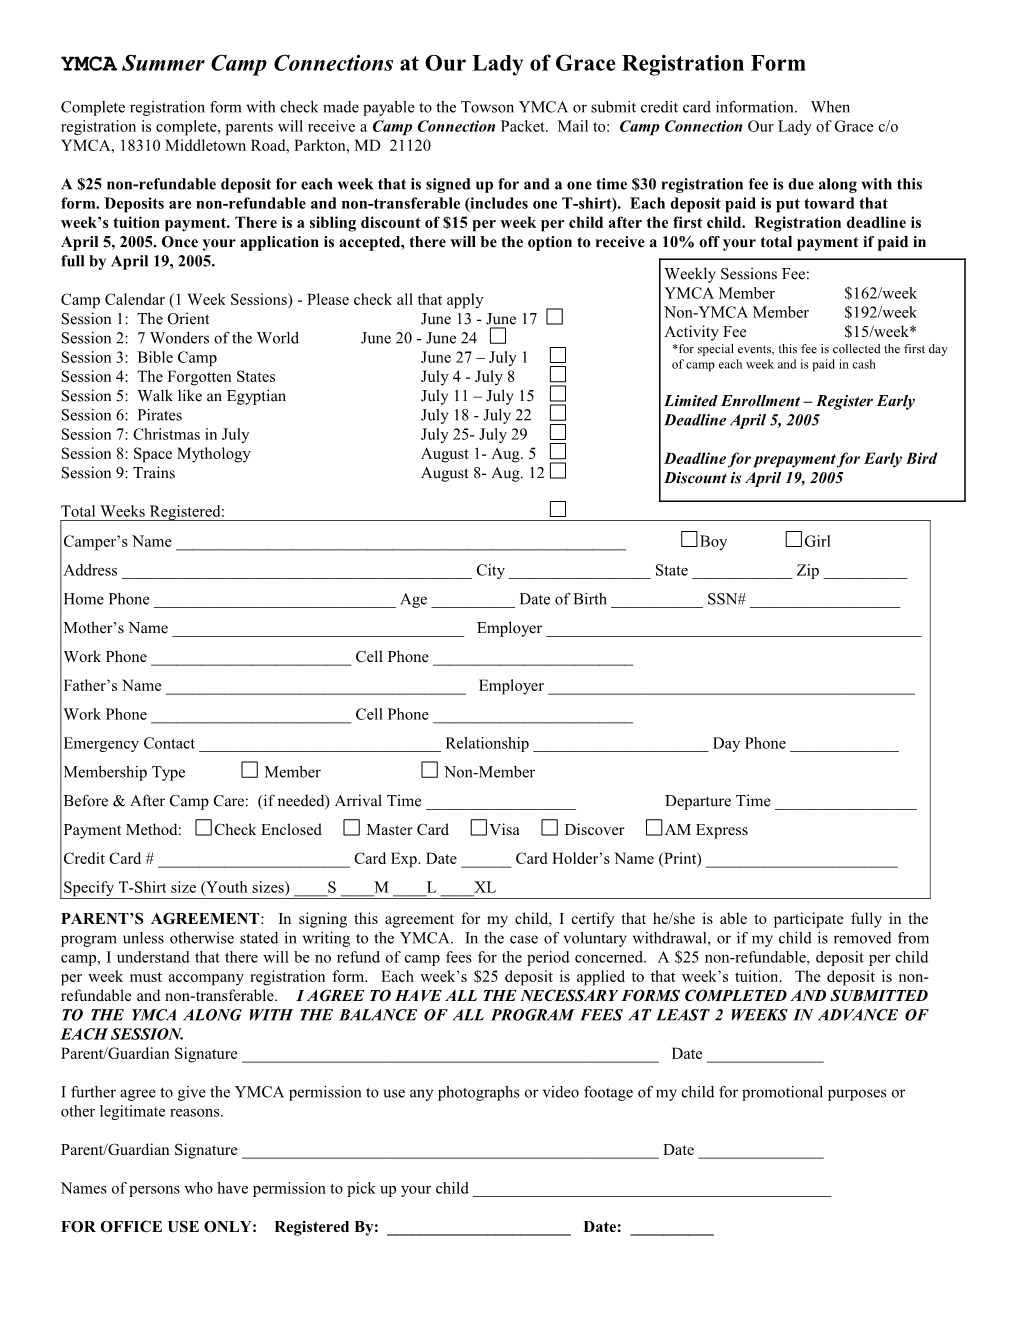 YMCA Summer Camp Connections at Our Lady of Grace Registration Form